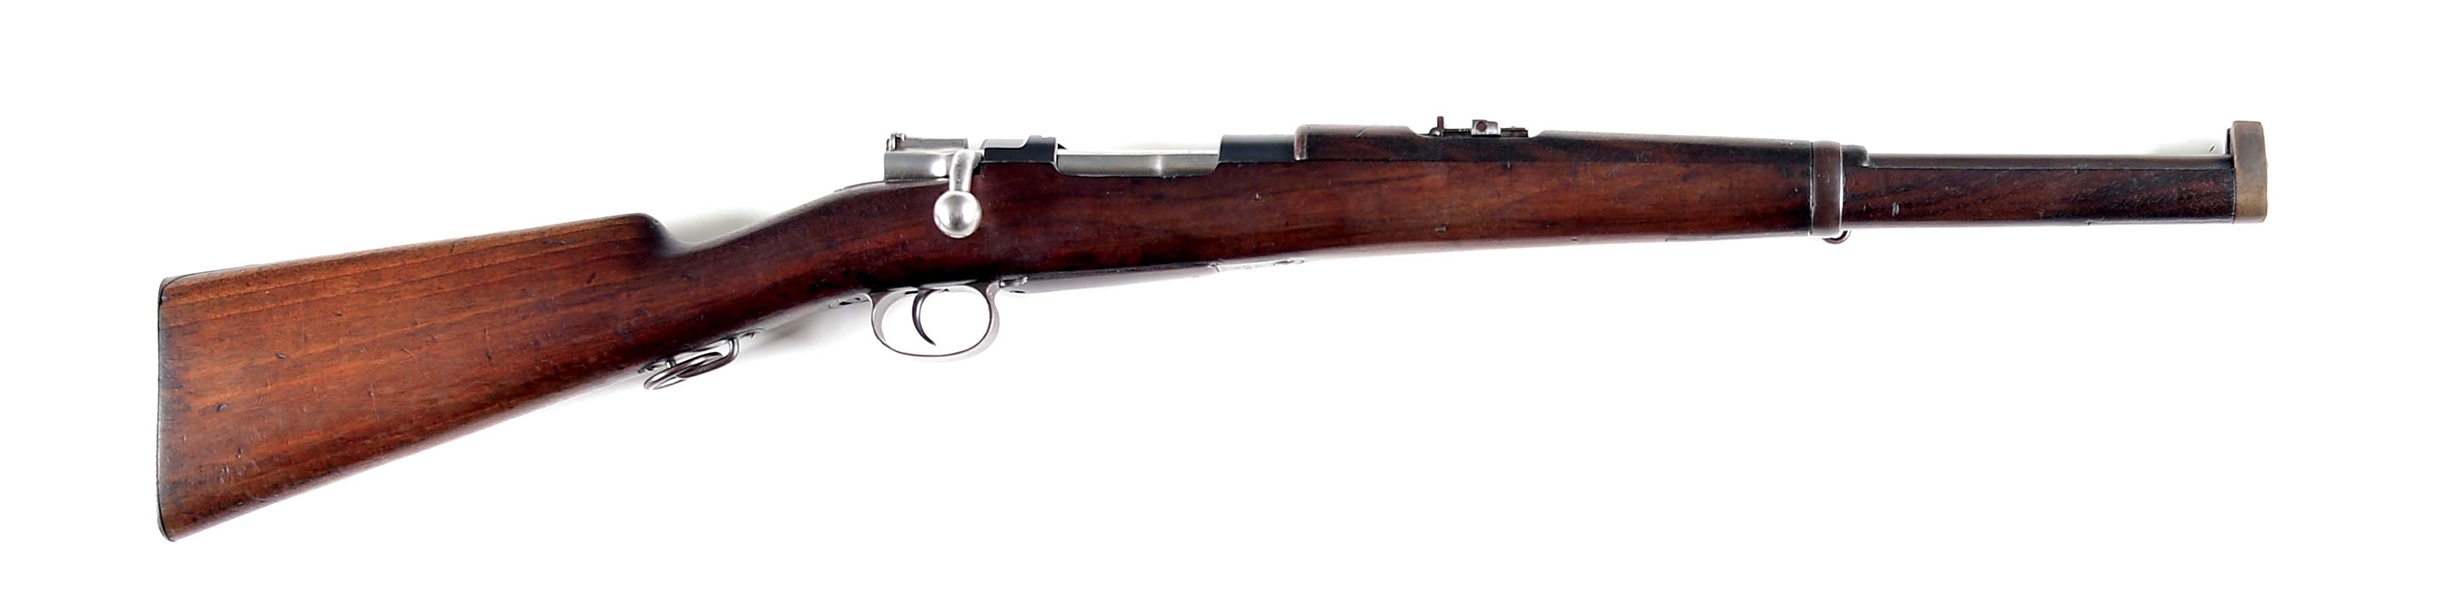 (C) SPANISH OVIEDO MADE 1895 MAUSER BOLT ACTION CARBINE "1913" DATED